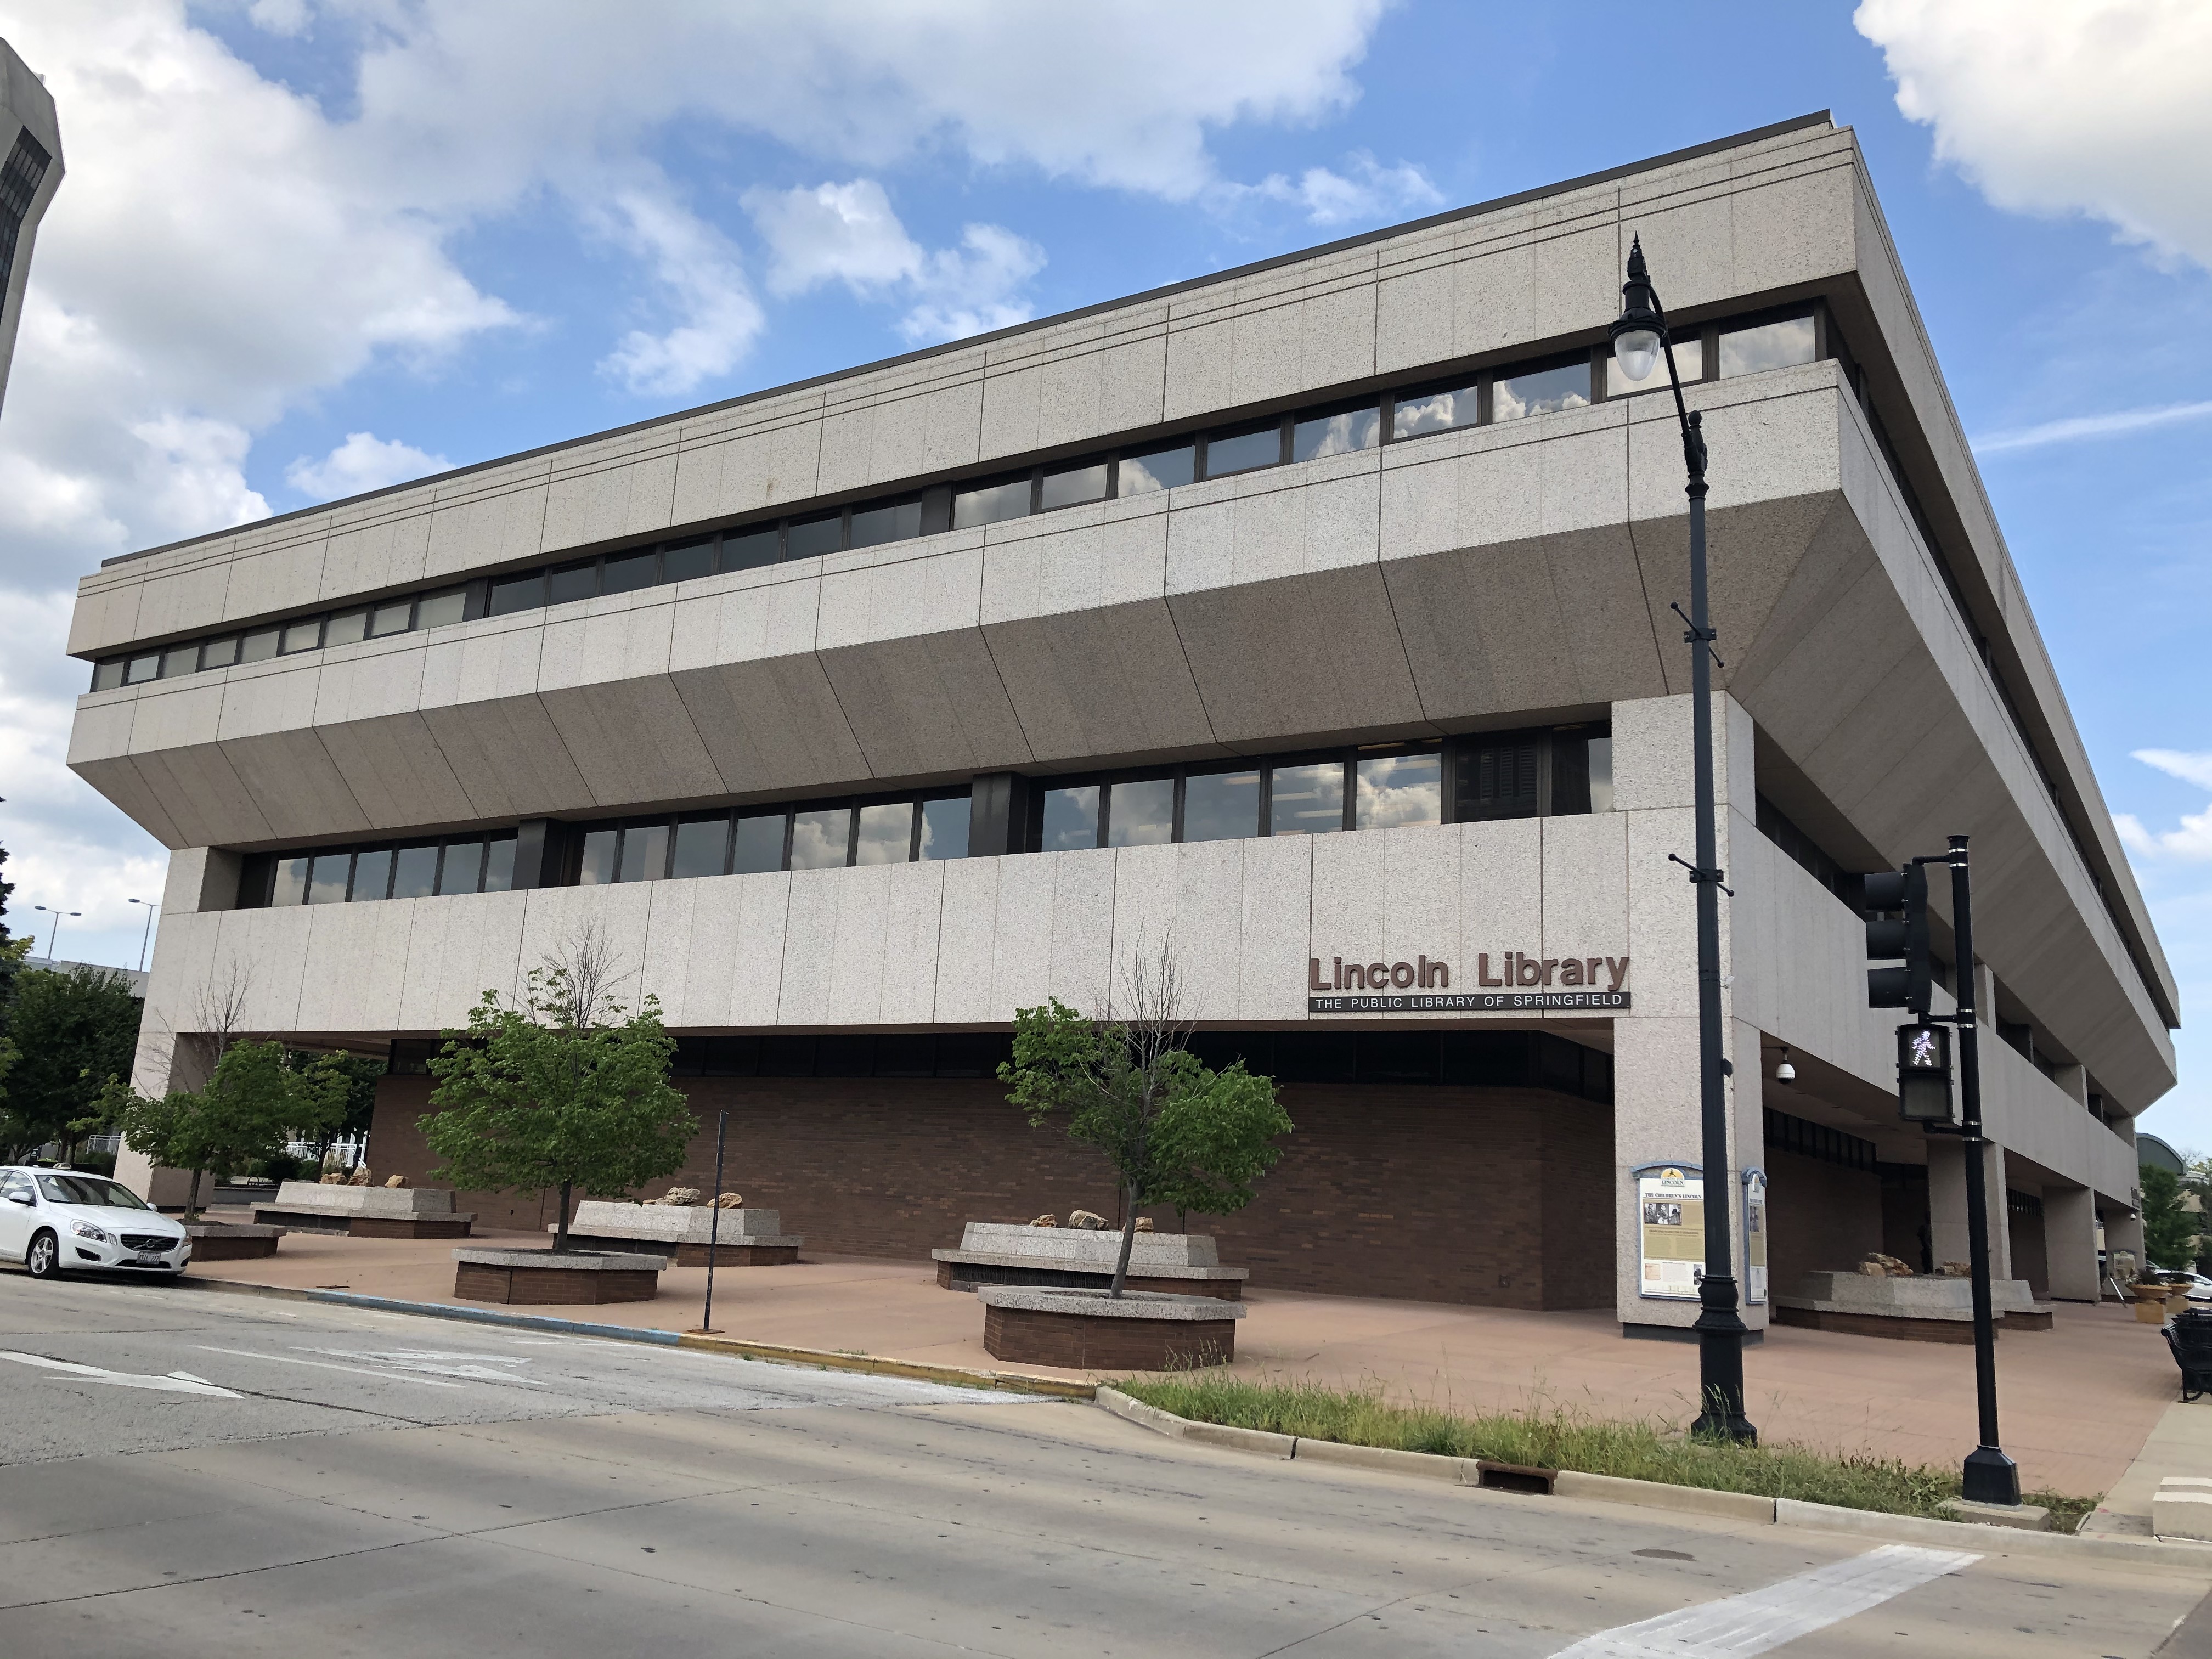 Exterior photo of Lincoln Library building